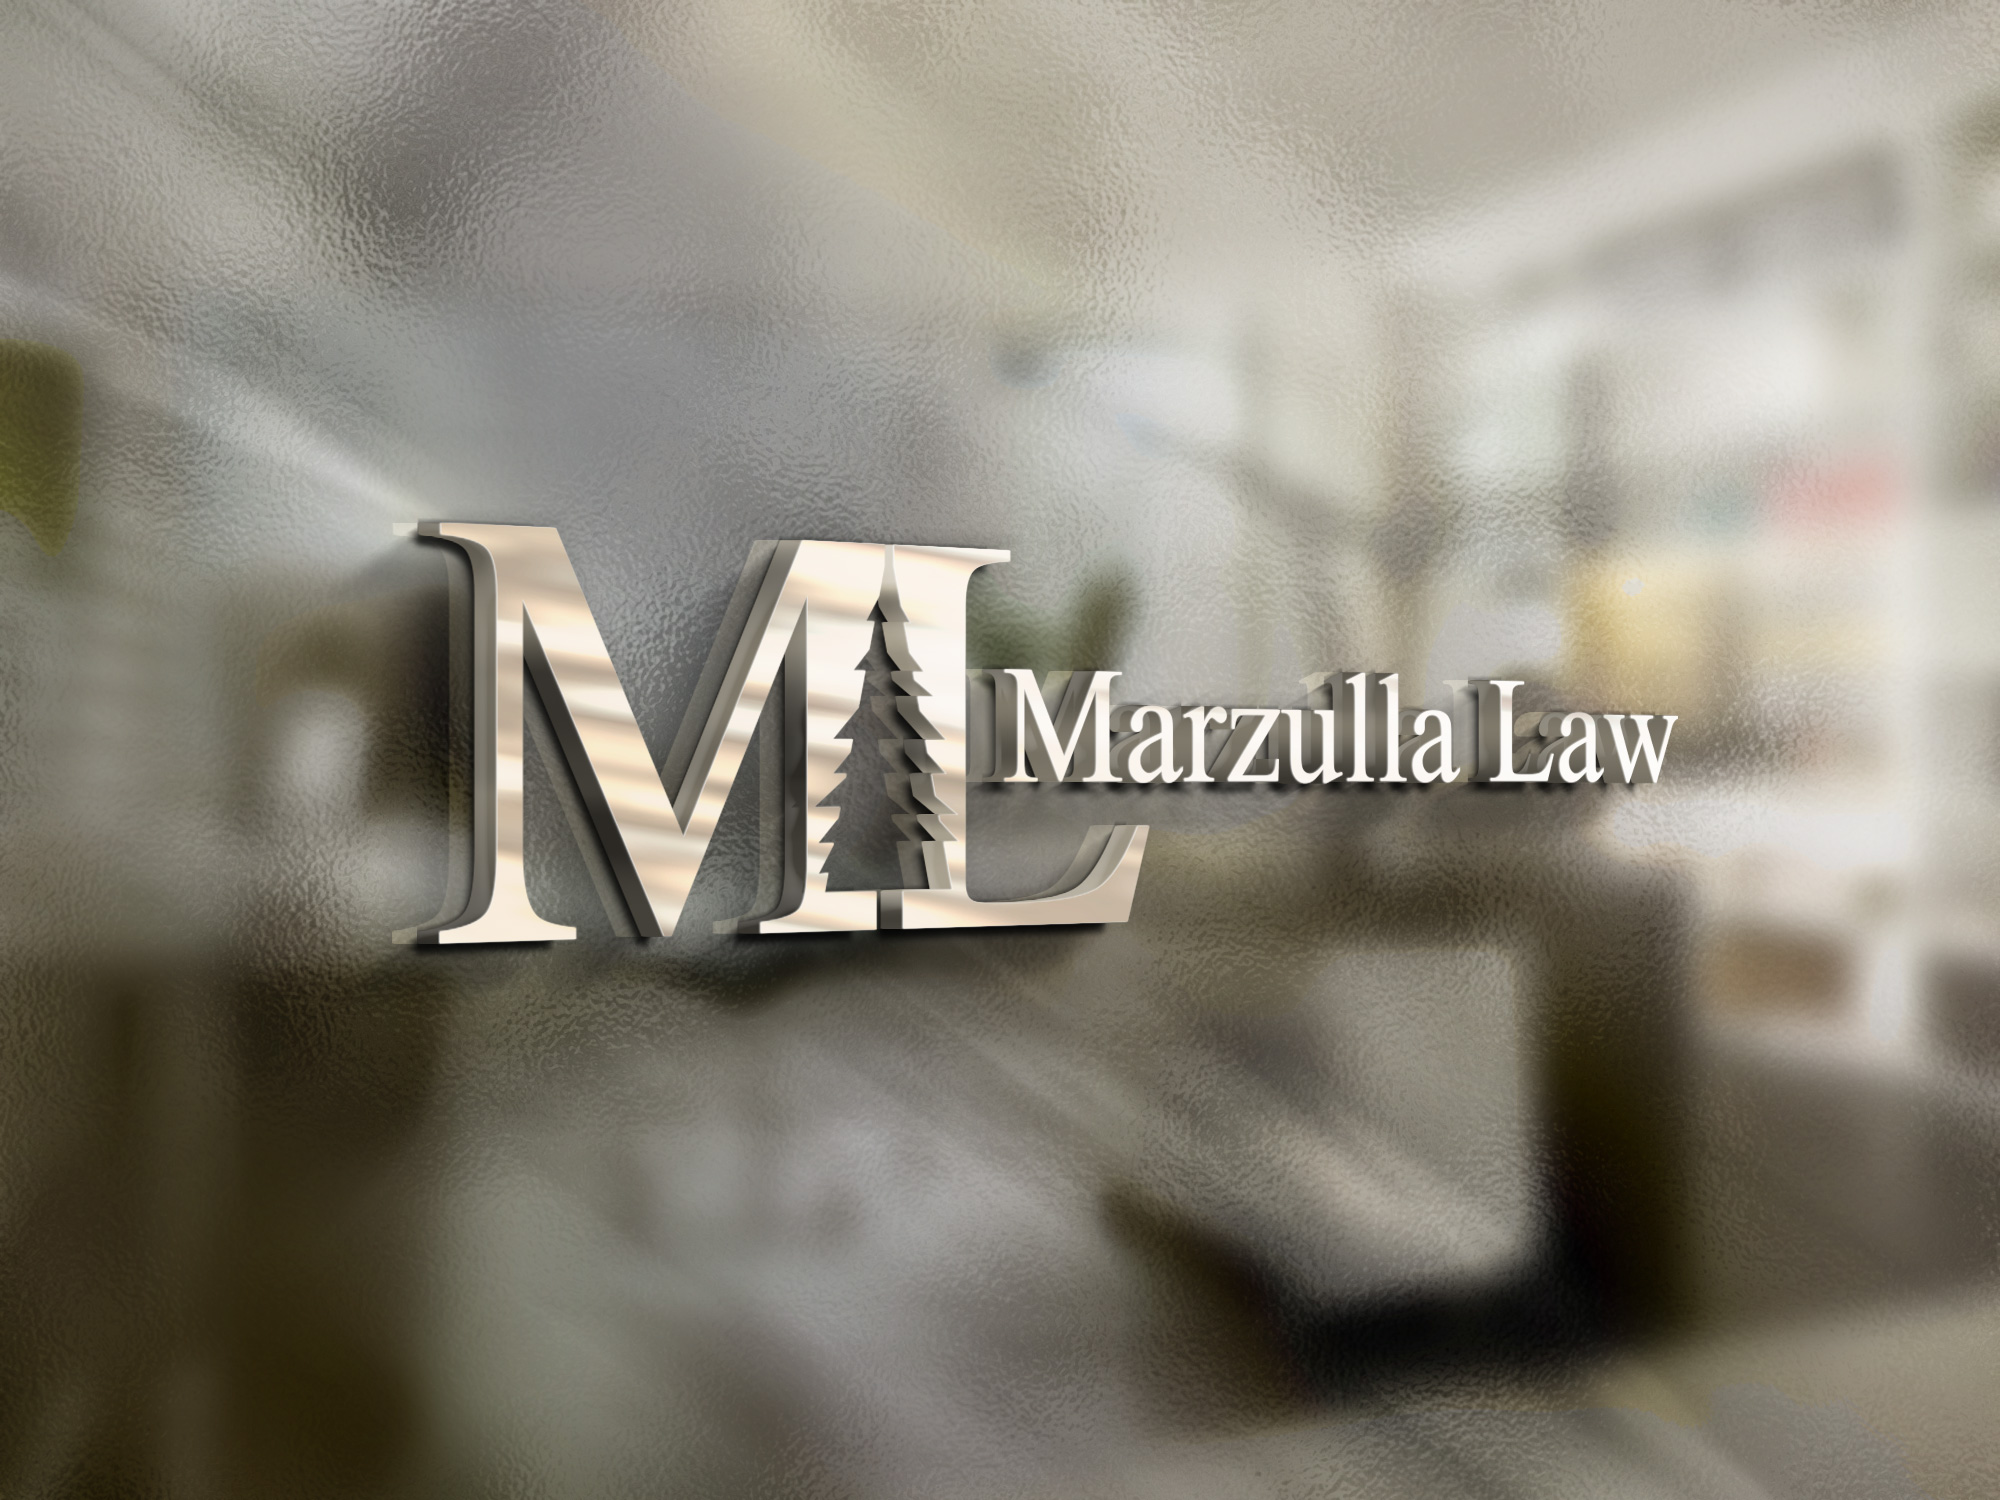 Marzulla Law | Court of Federal Claims Litigation Law firm | Washington, DC Best Logo Design By PYI